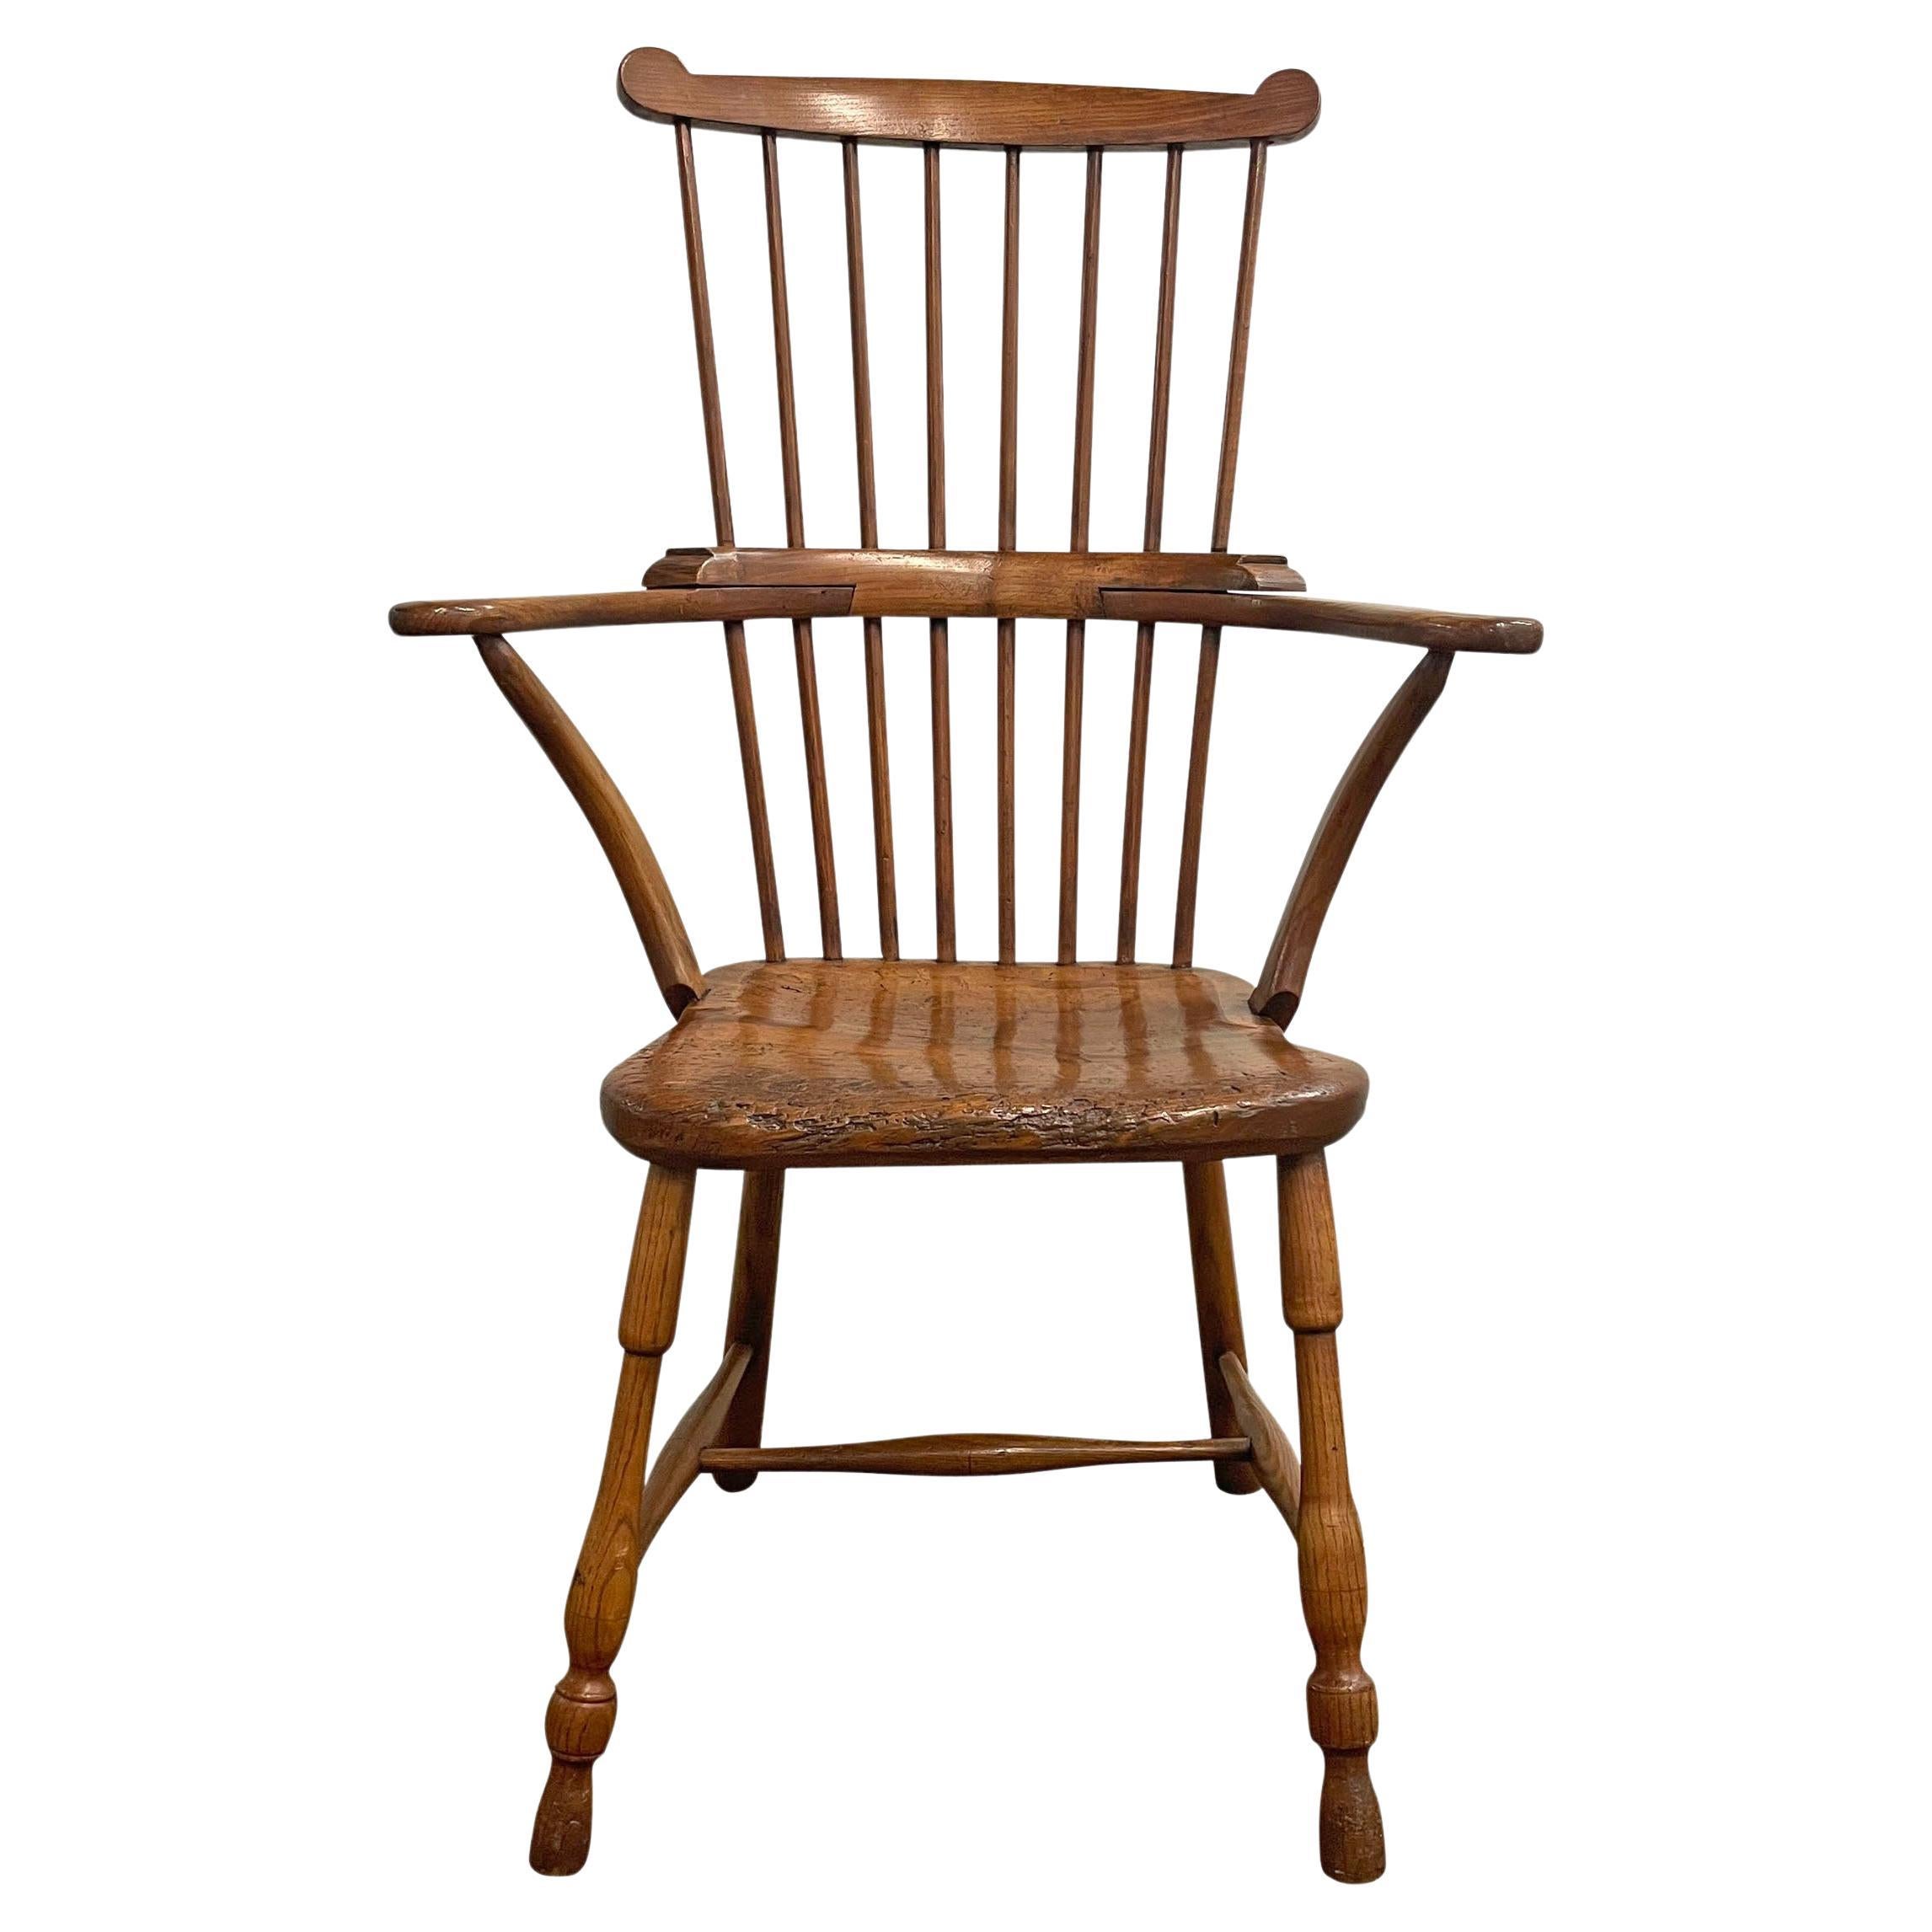 19th Century English Comb-Back Windsor Chair